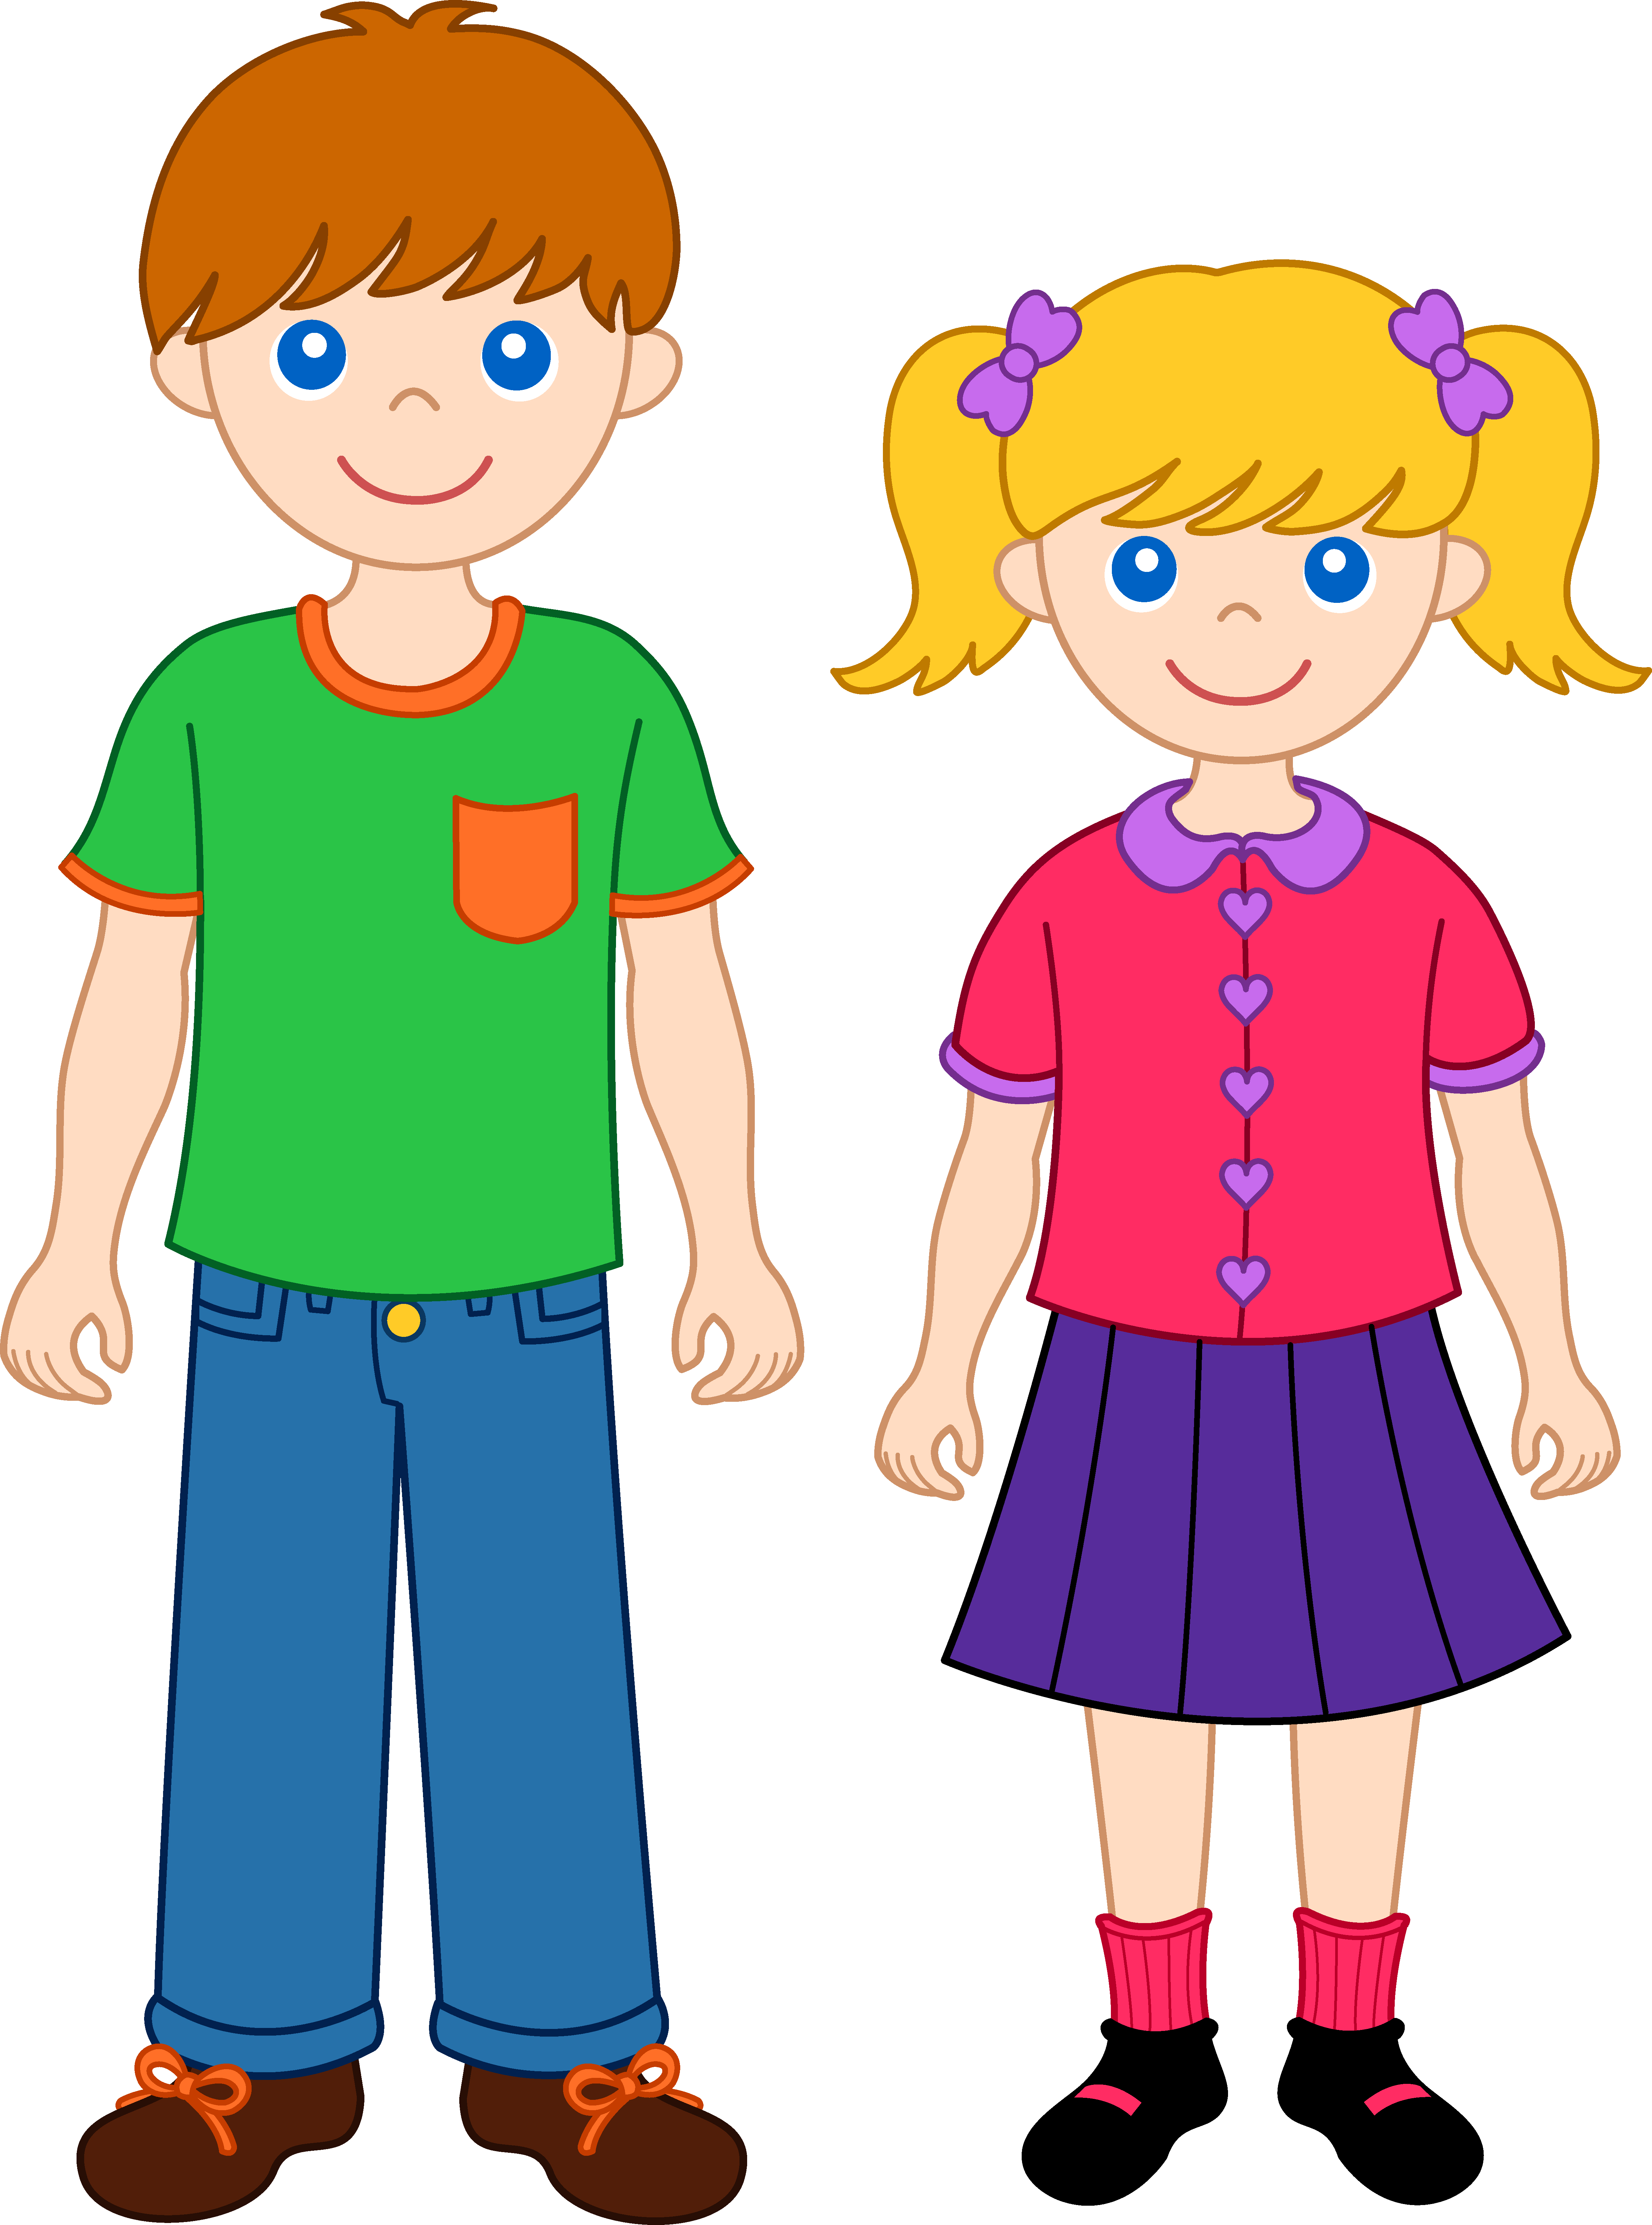 sister clipart. Girlfriends cliparts. Girlfriends cliparts. Brother cliparts